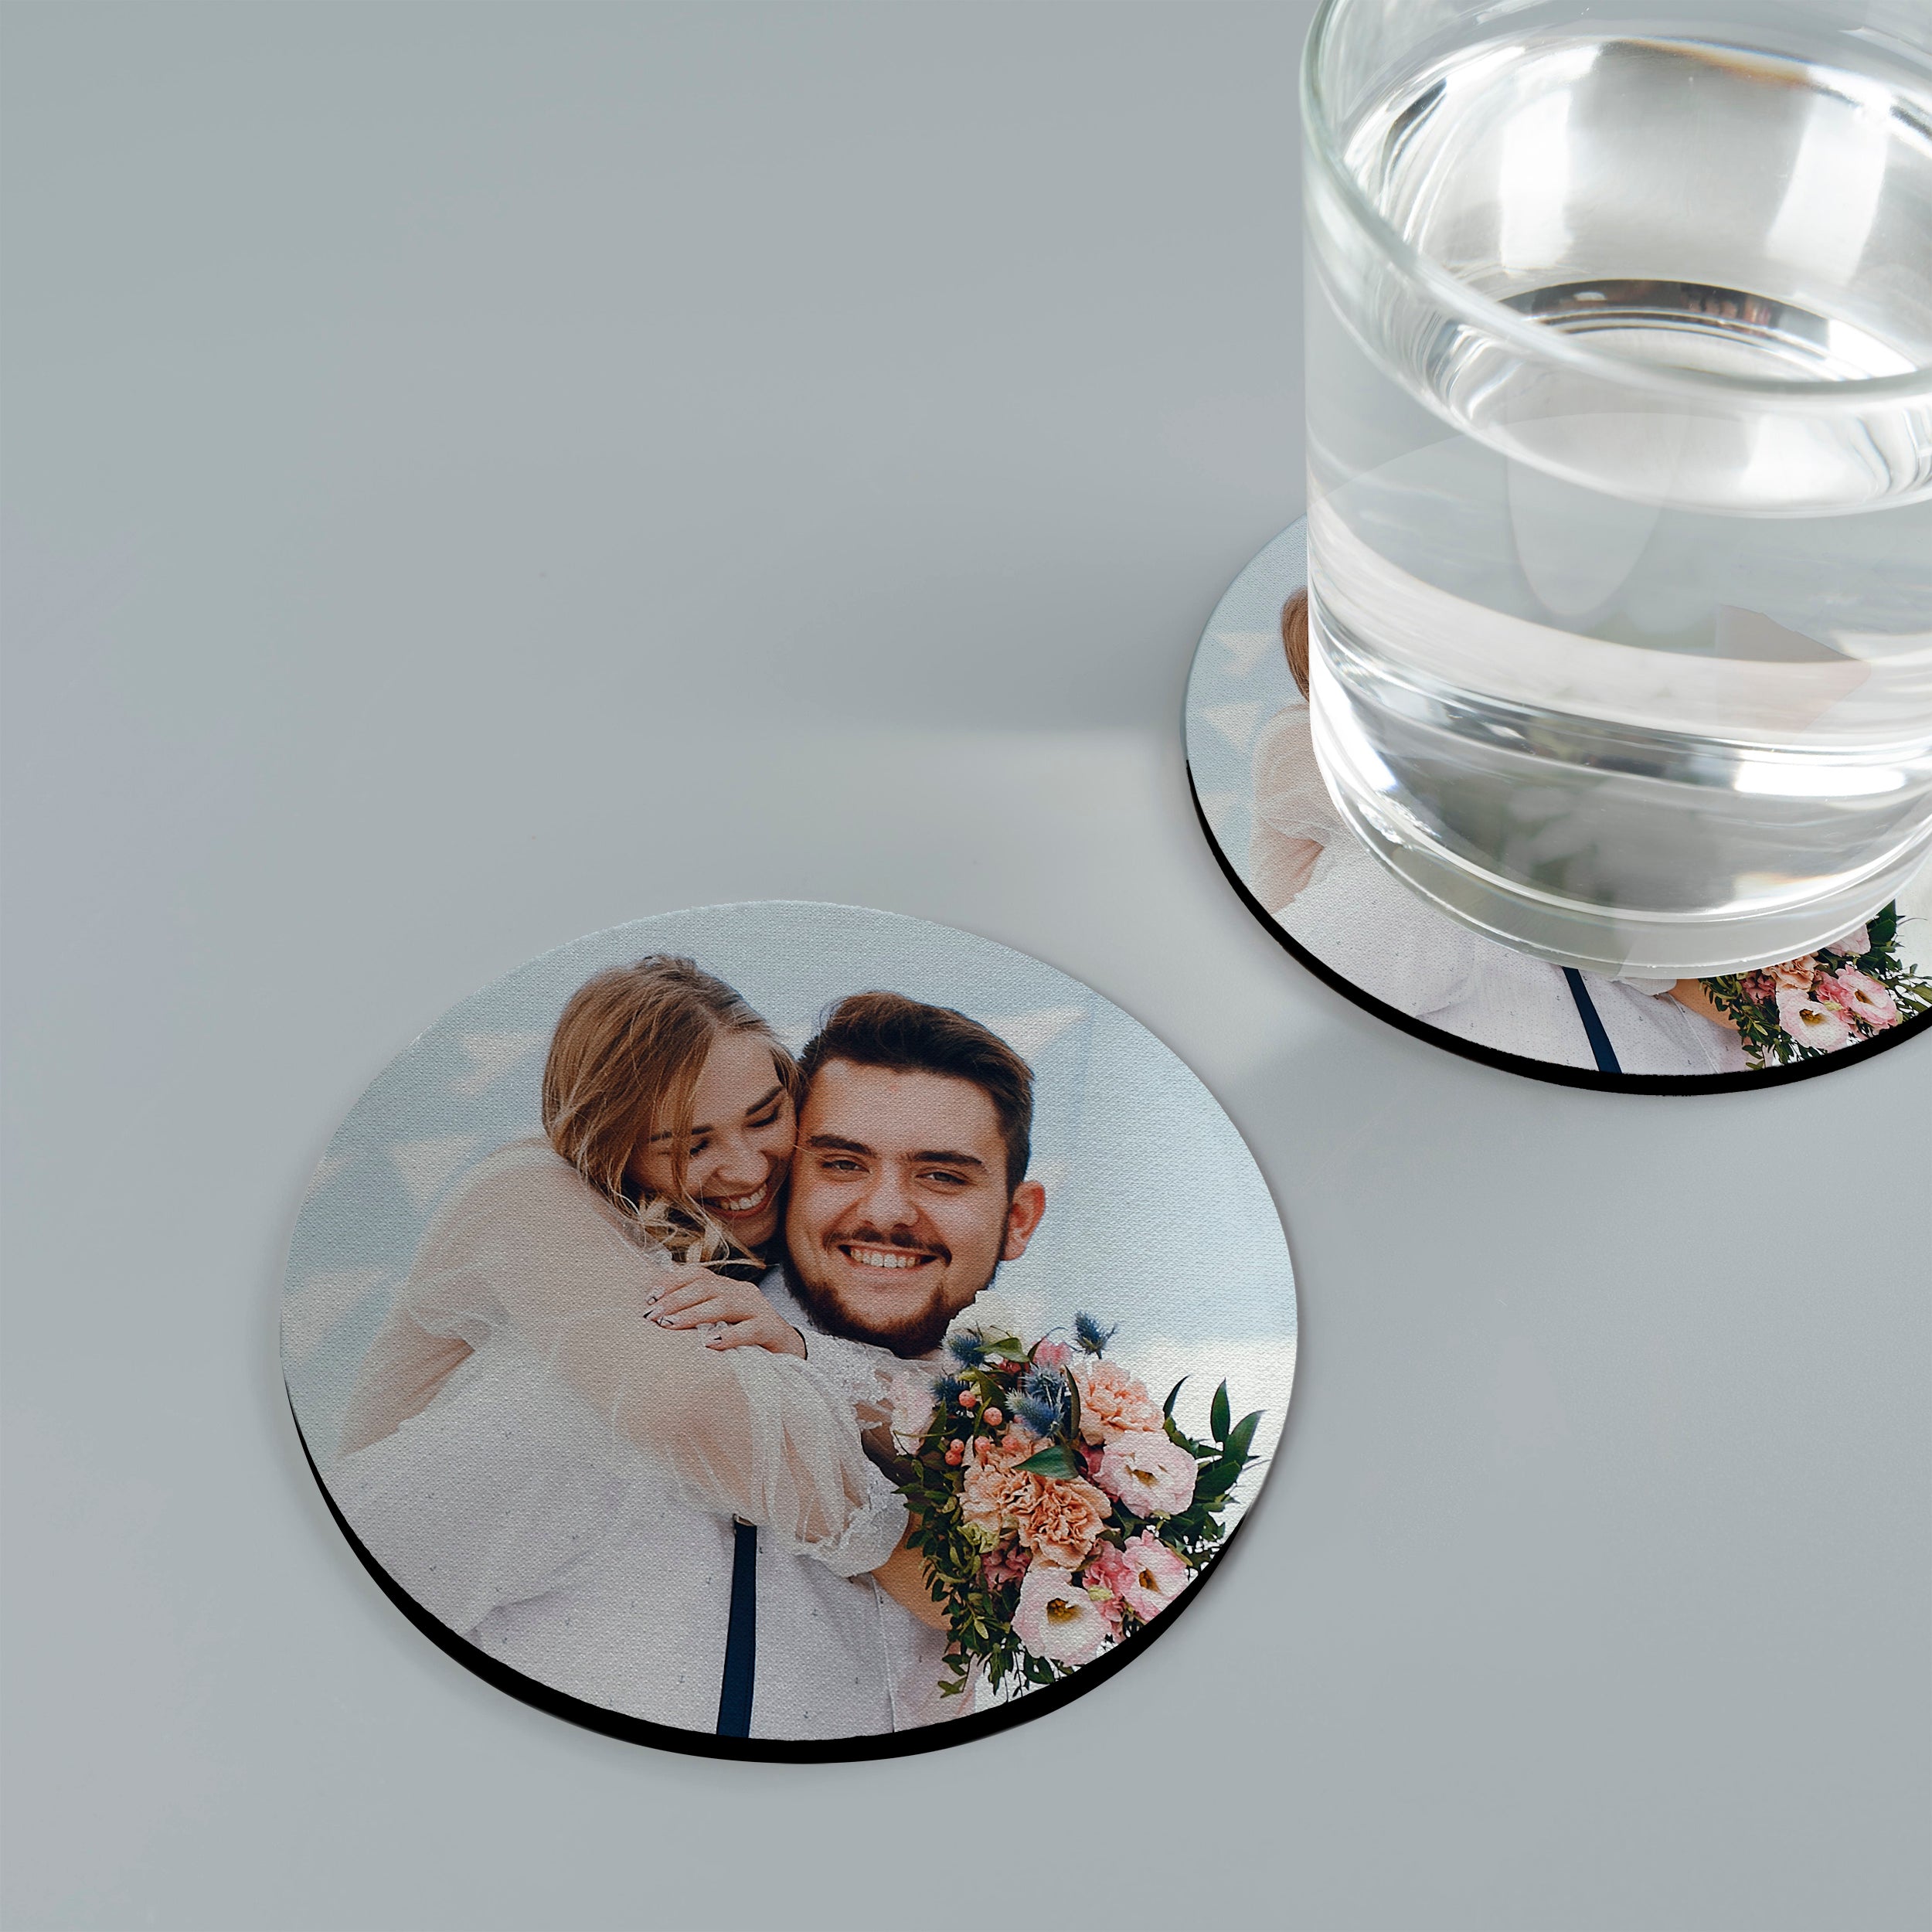 Create Your Own - Personalised Drinks Coaster - Round or Square